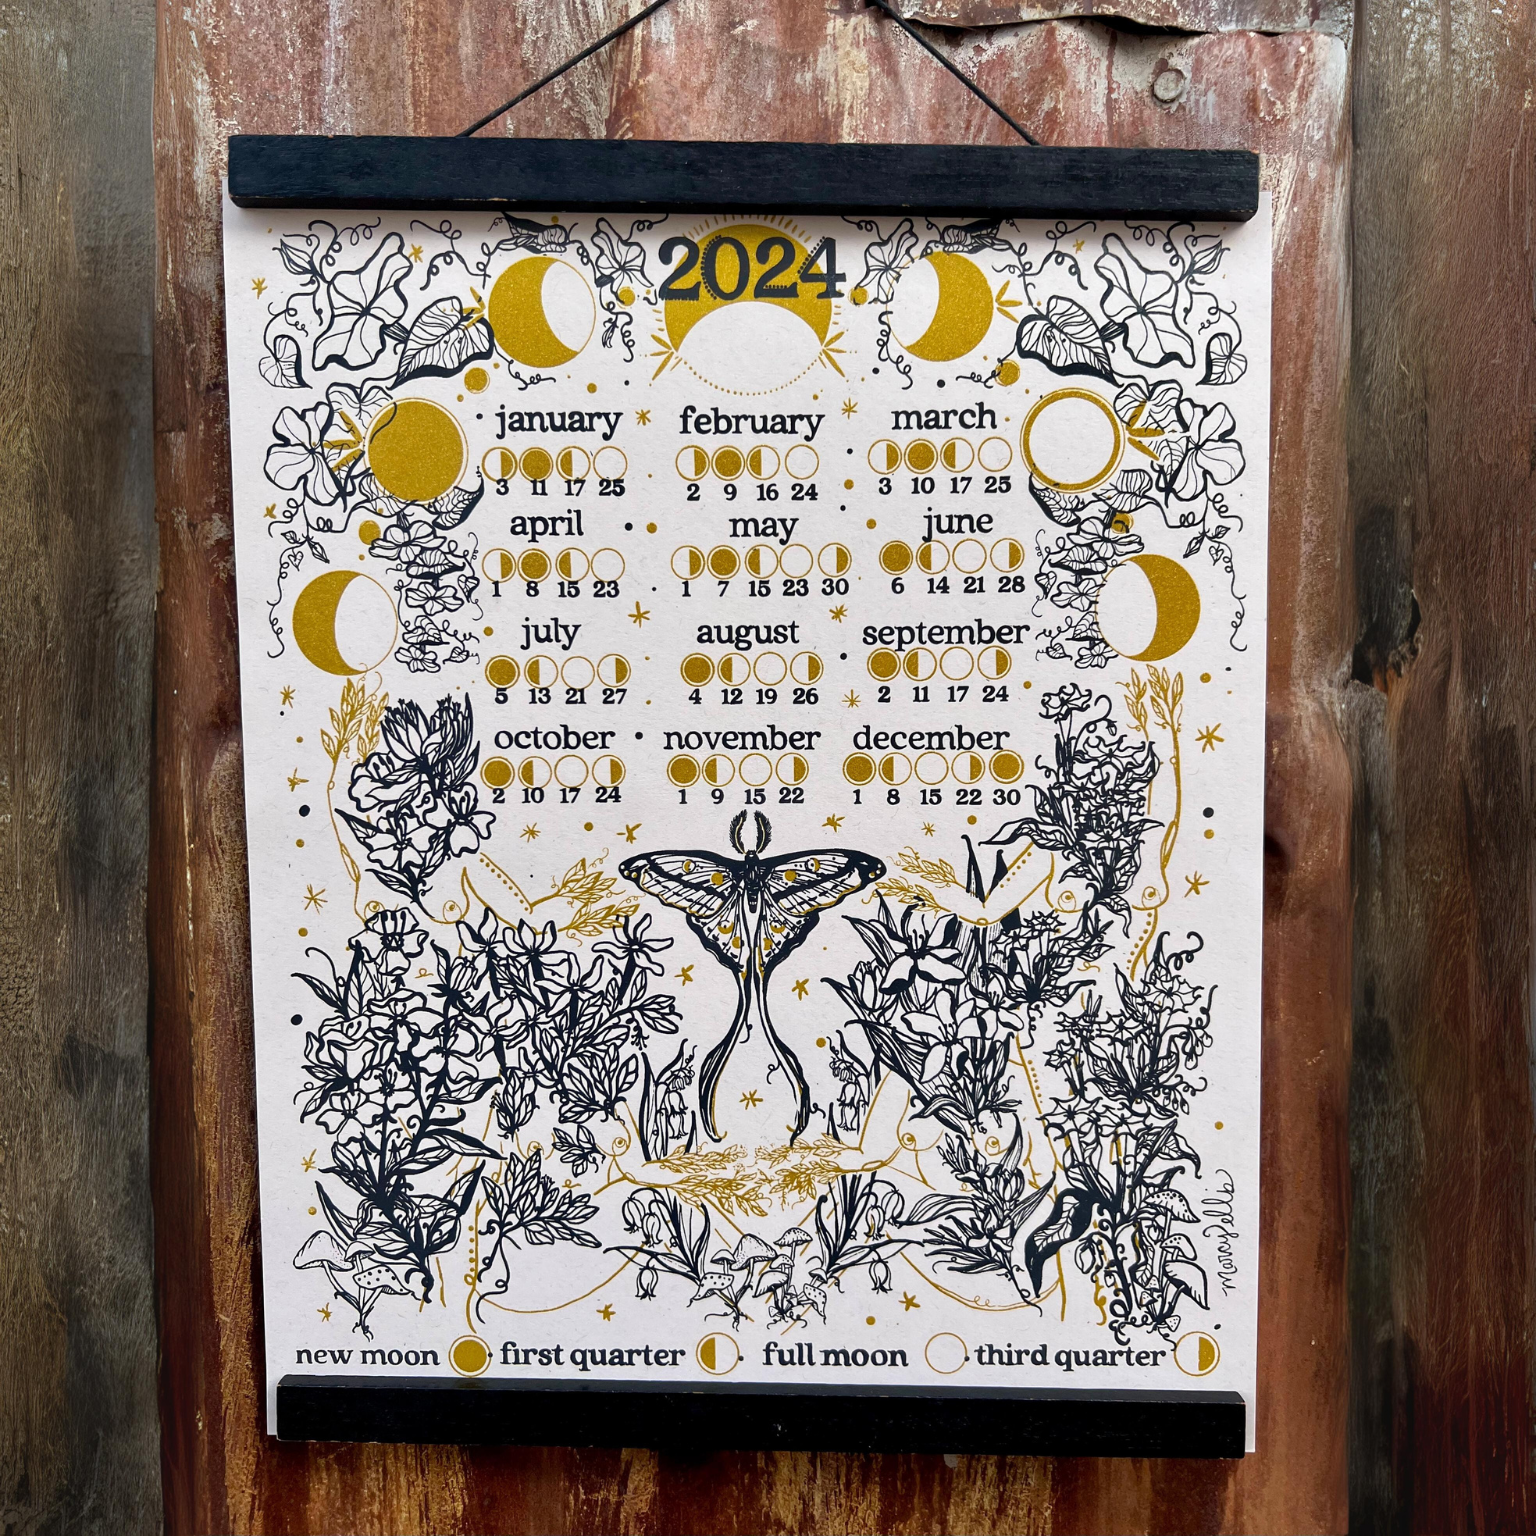 white 2024 moon phase calendar displayed on wall